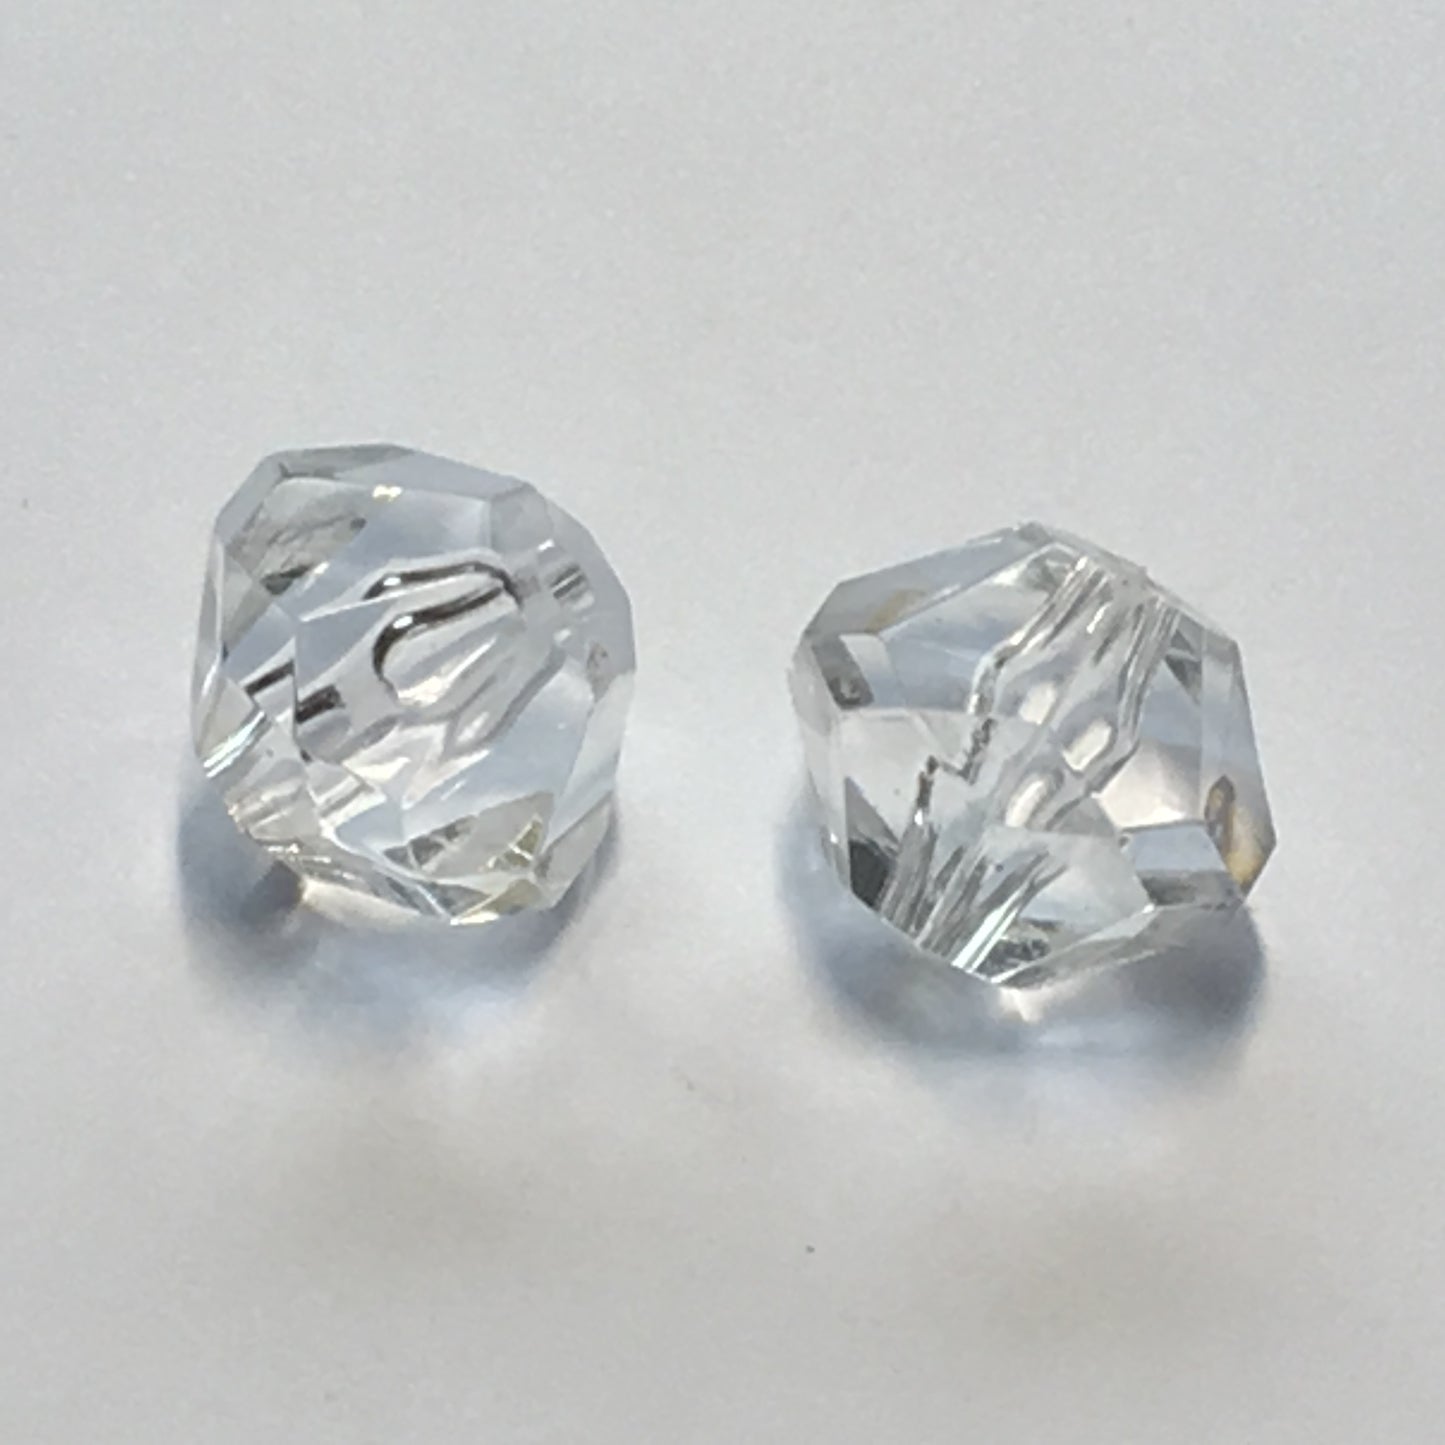 Clear Acrylic Faceted Round Beads, 15 x 19 mm - 2 Beads